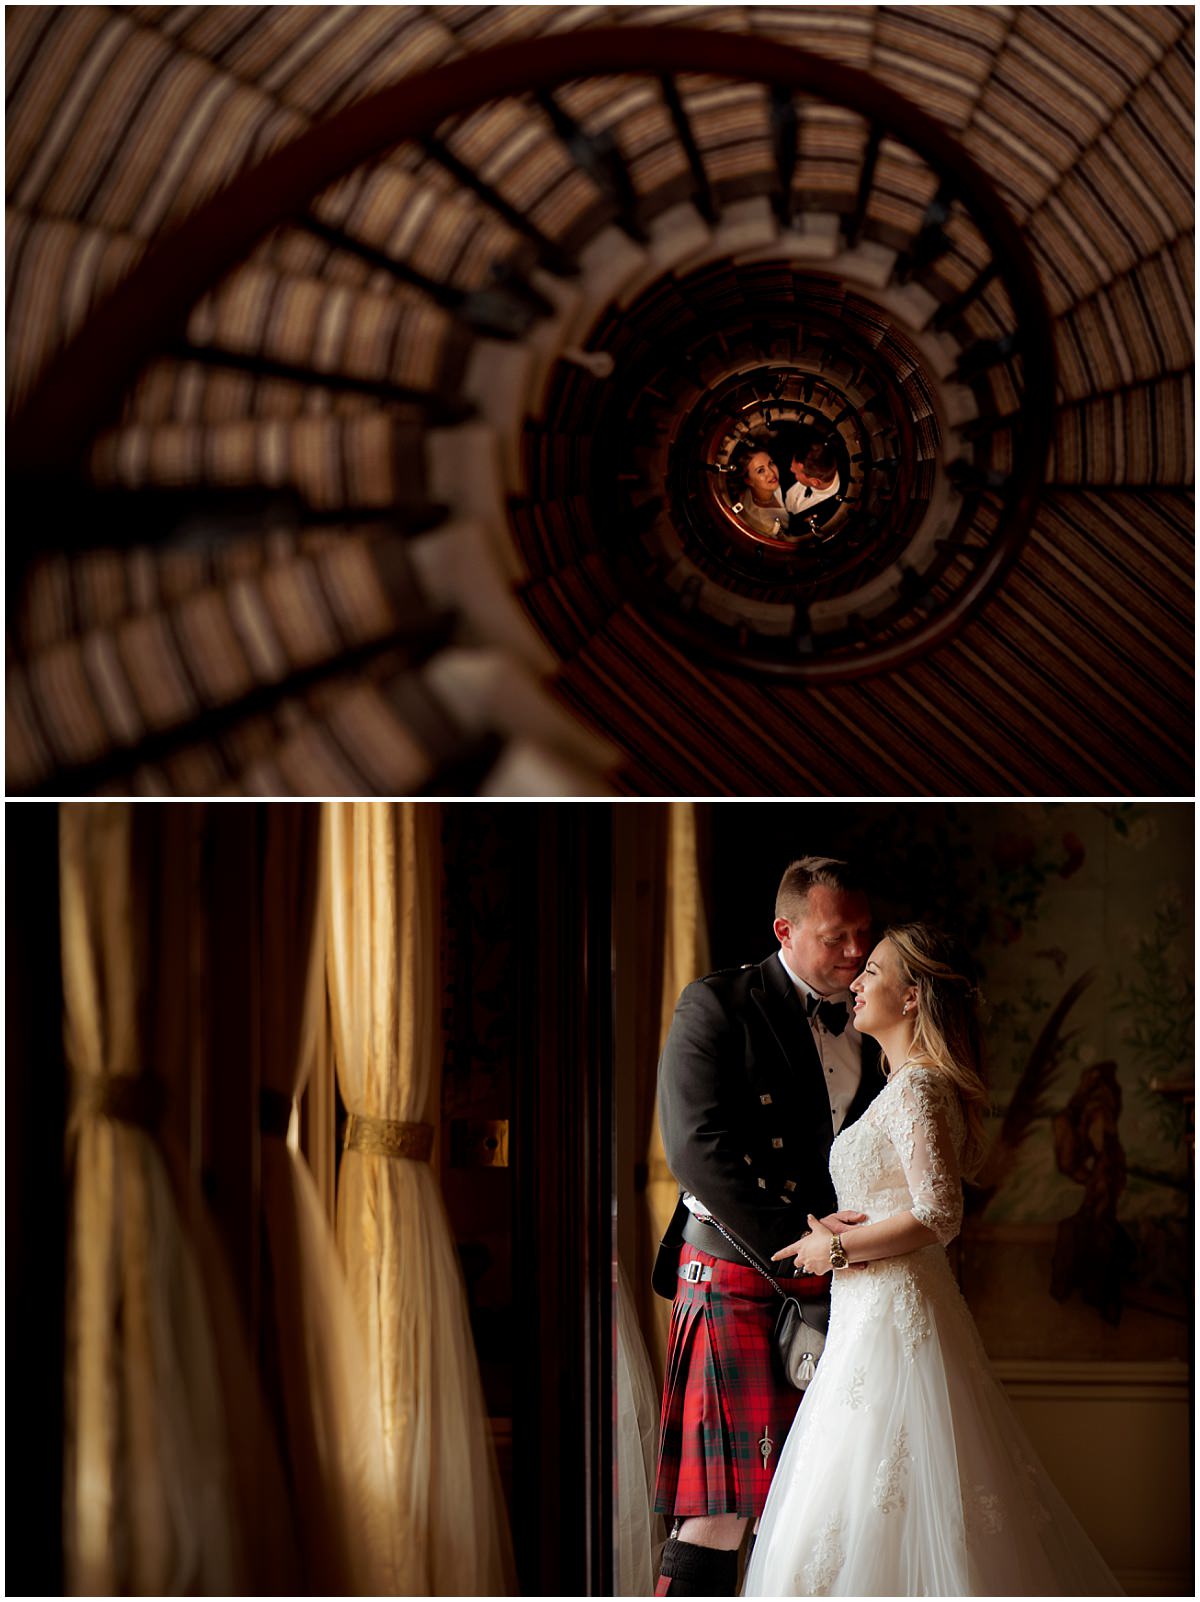 Weddings at Belvoir Castle staircase